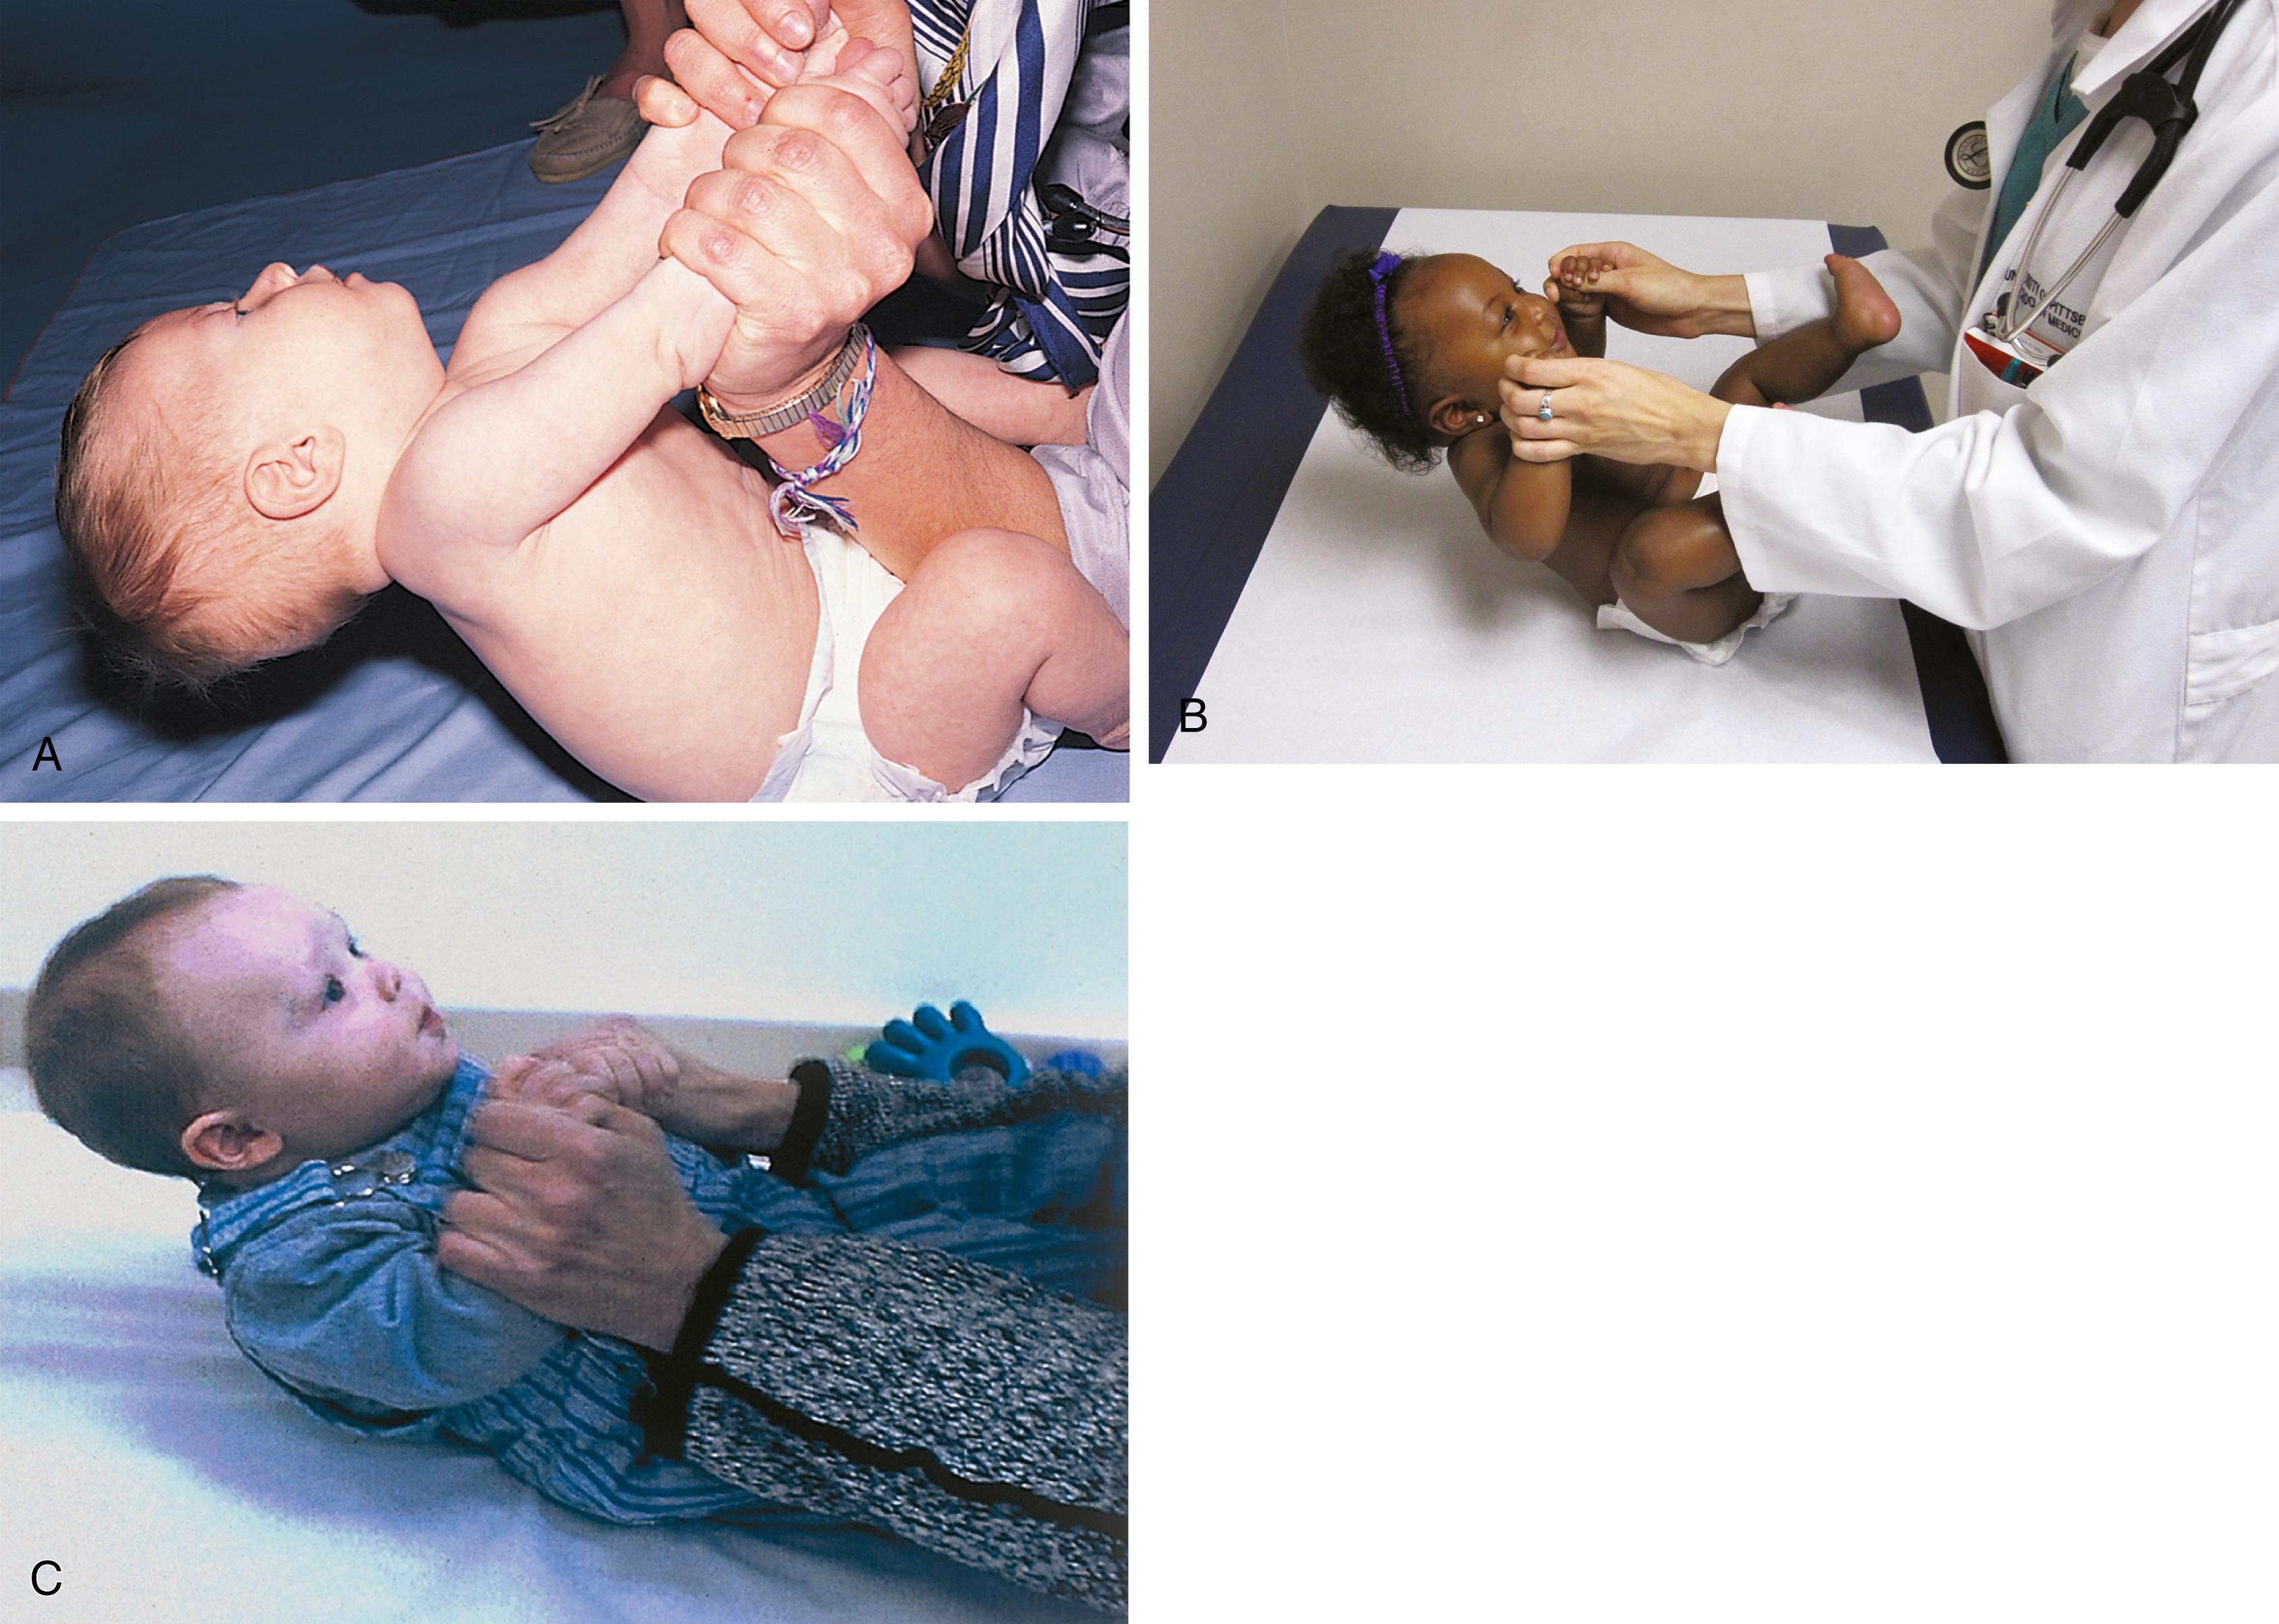 Fig. 3.4, Development of head control on the pull-to-sit maneuver. (A) At 1 month old, the head lags after the shoulders. (B) By 4 months old, the child is able to support the head, and the head moves along with the shoulders. (C) At 5 to 6 months old, the child anticipates the movement and raises the head before the shoulders.